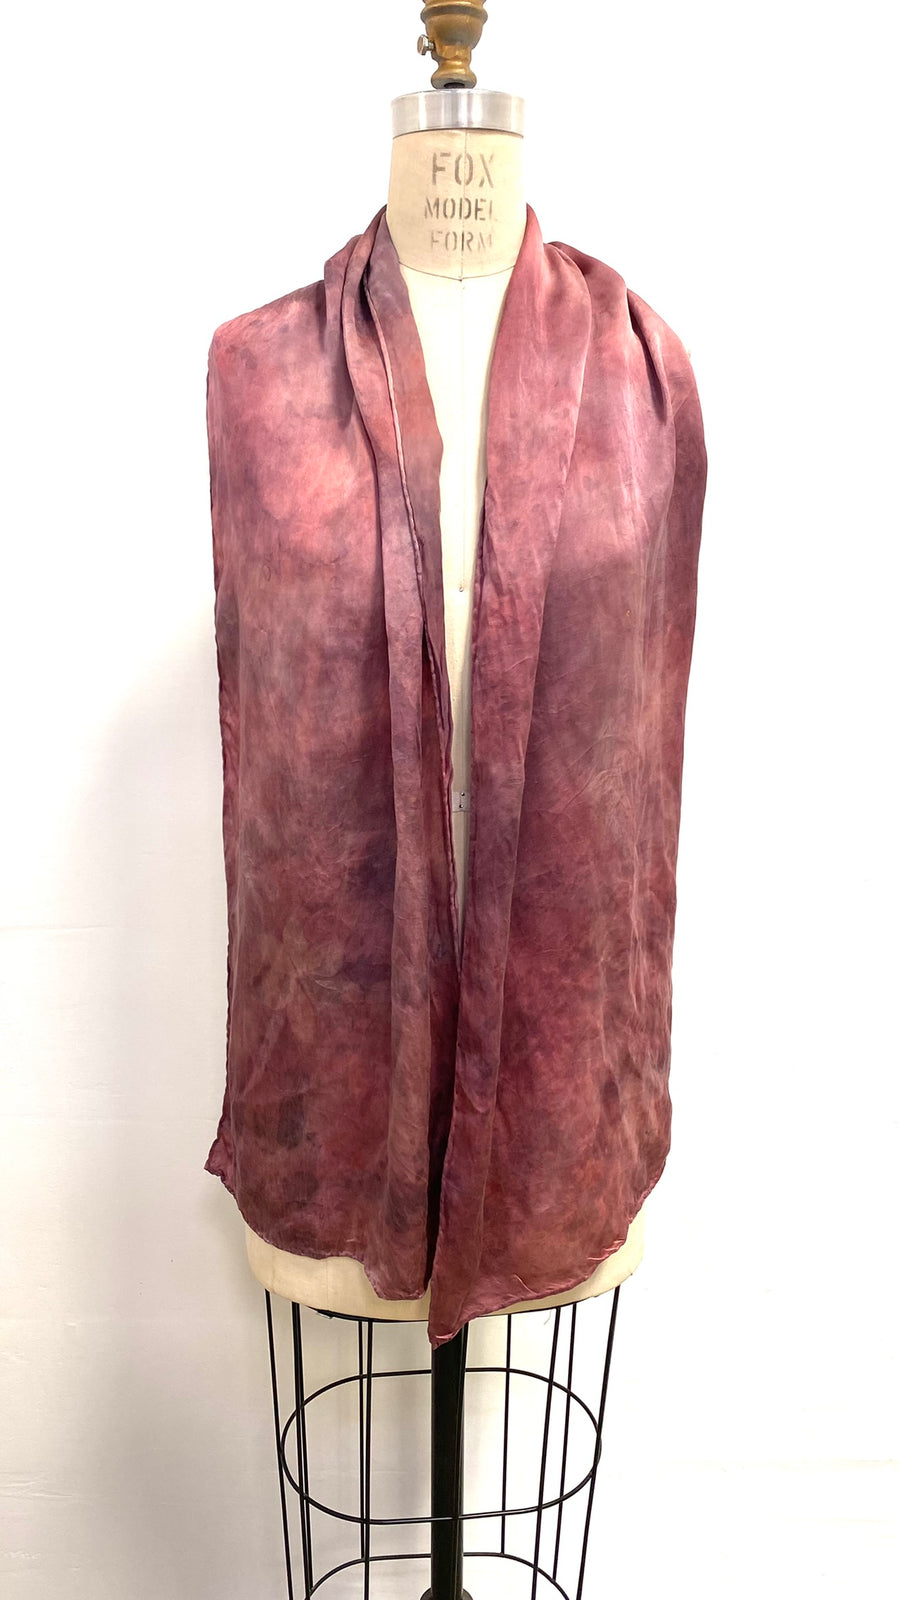 Silk Scarf in Burgundy - Natural Dyes - Hand Rolled Edges